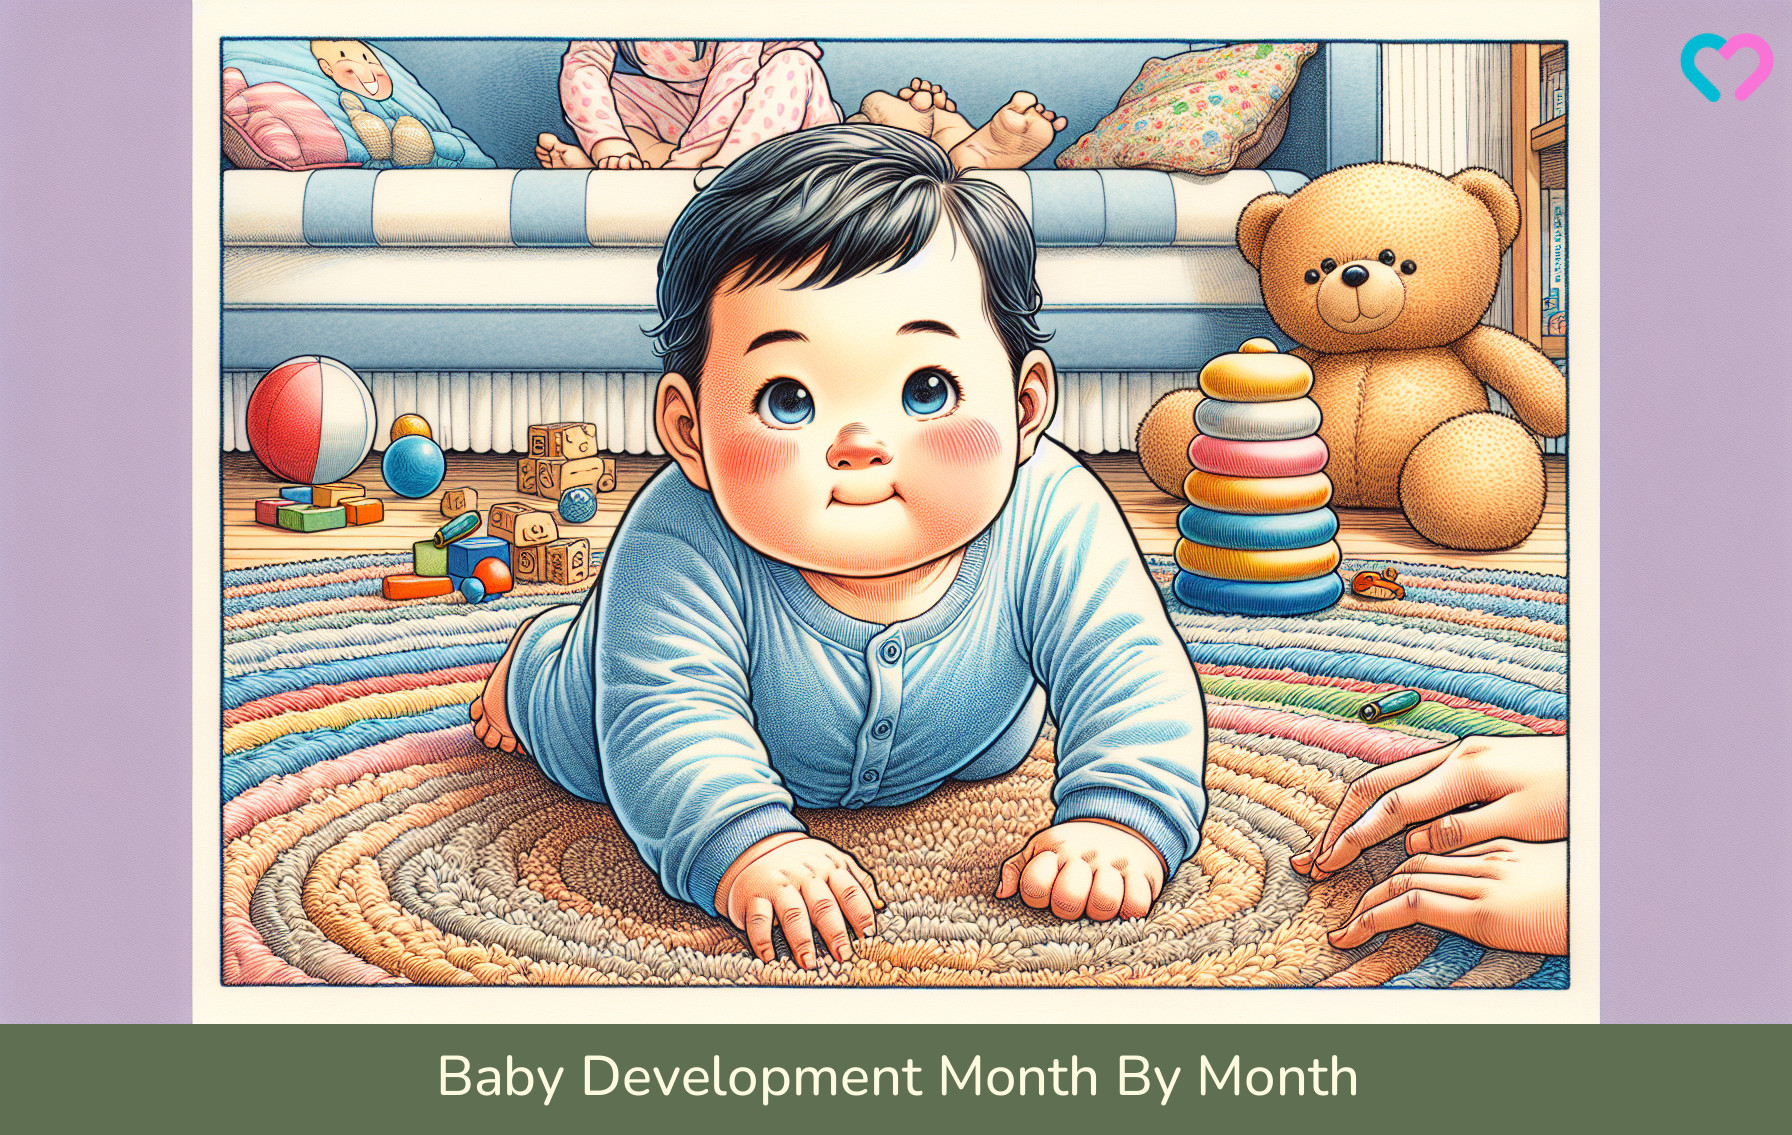 Baby Development Month By Month_illustration